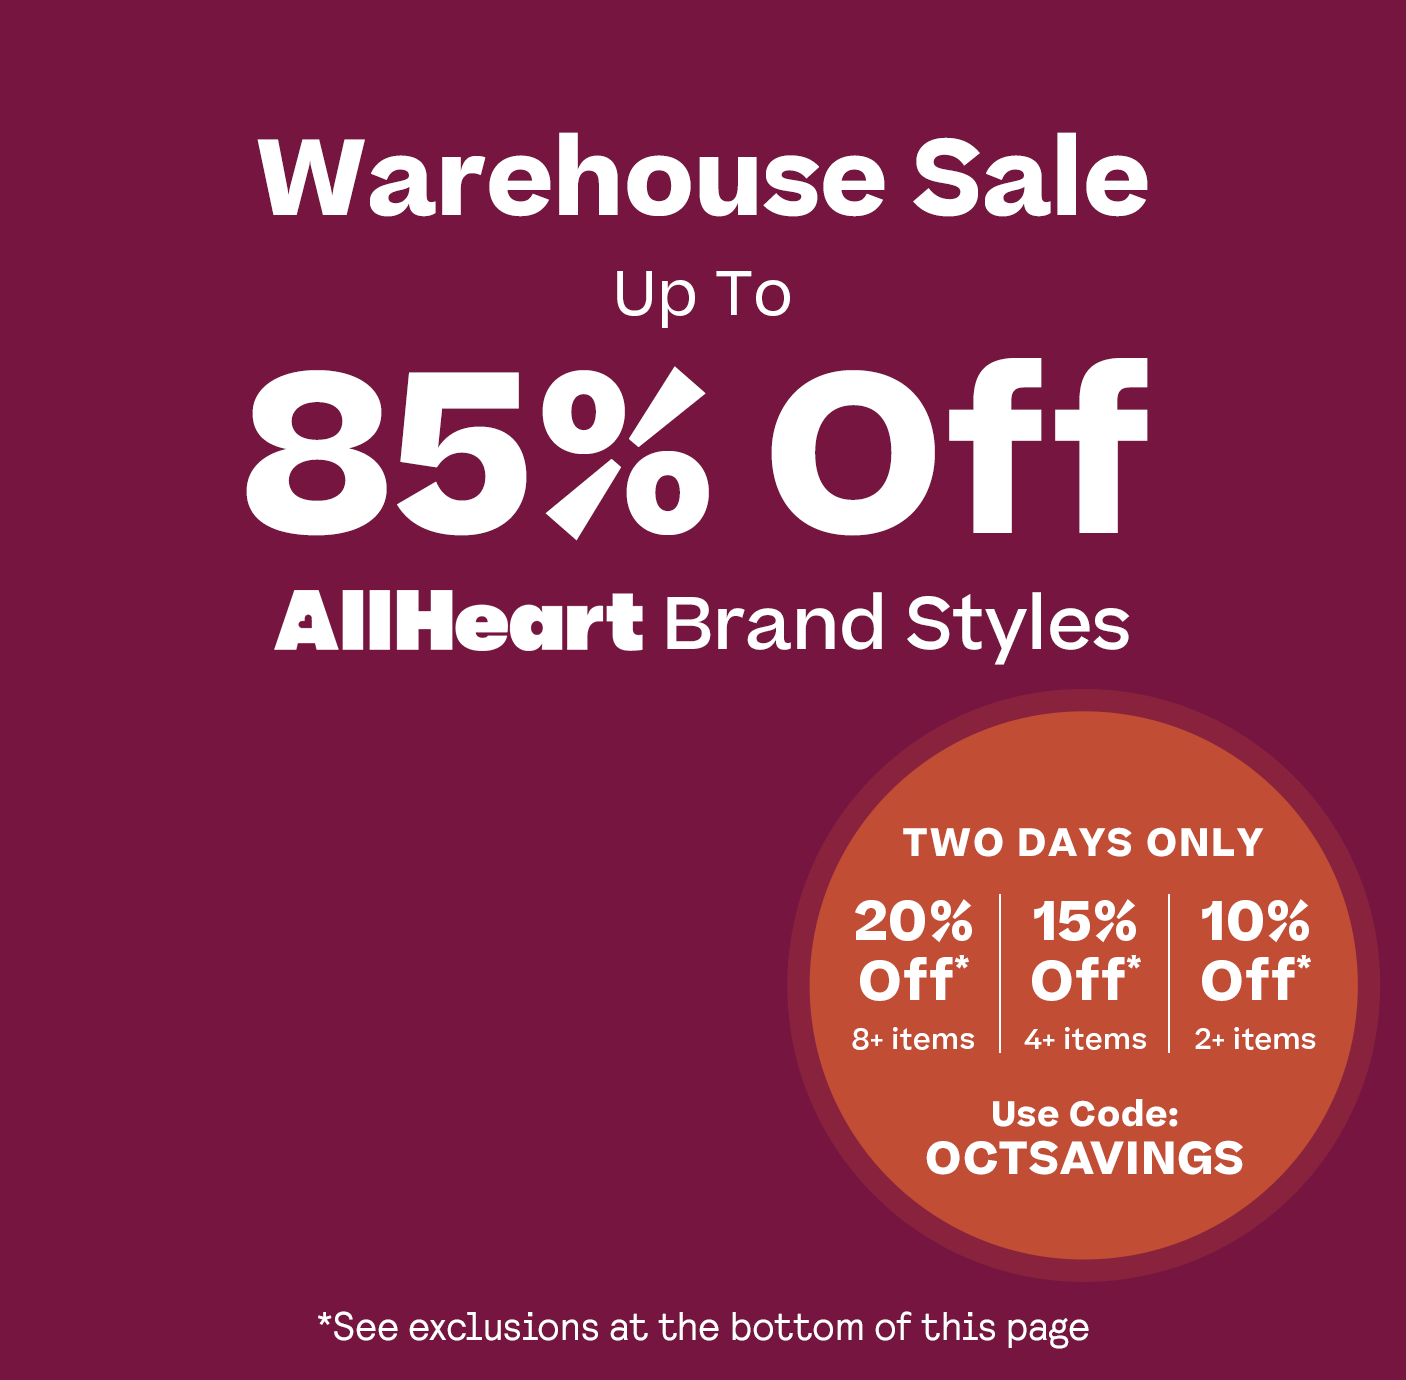 Up to 85% Off AllHeart Warehouse Sale plus 10% OFF 2+ Items 15% OFF 4+ Items  20% OFF* 8+ Items. Code: OCTSAVINGS